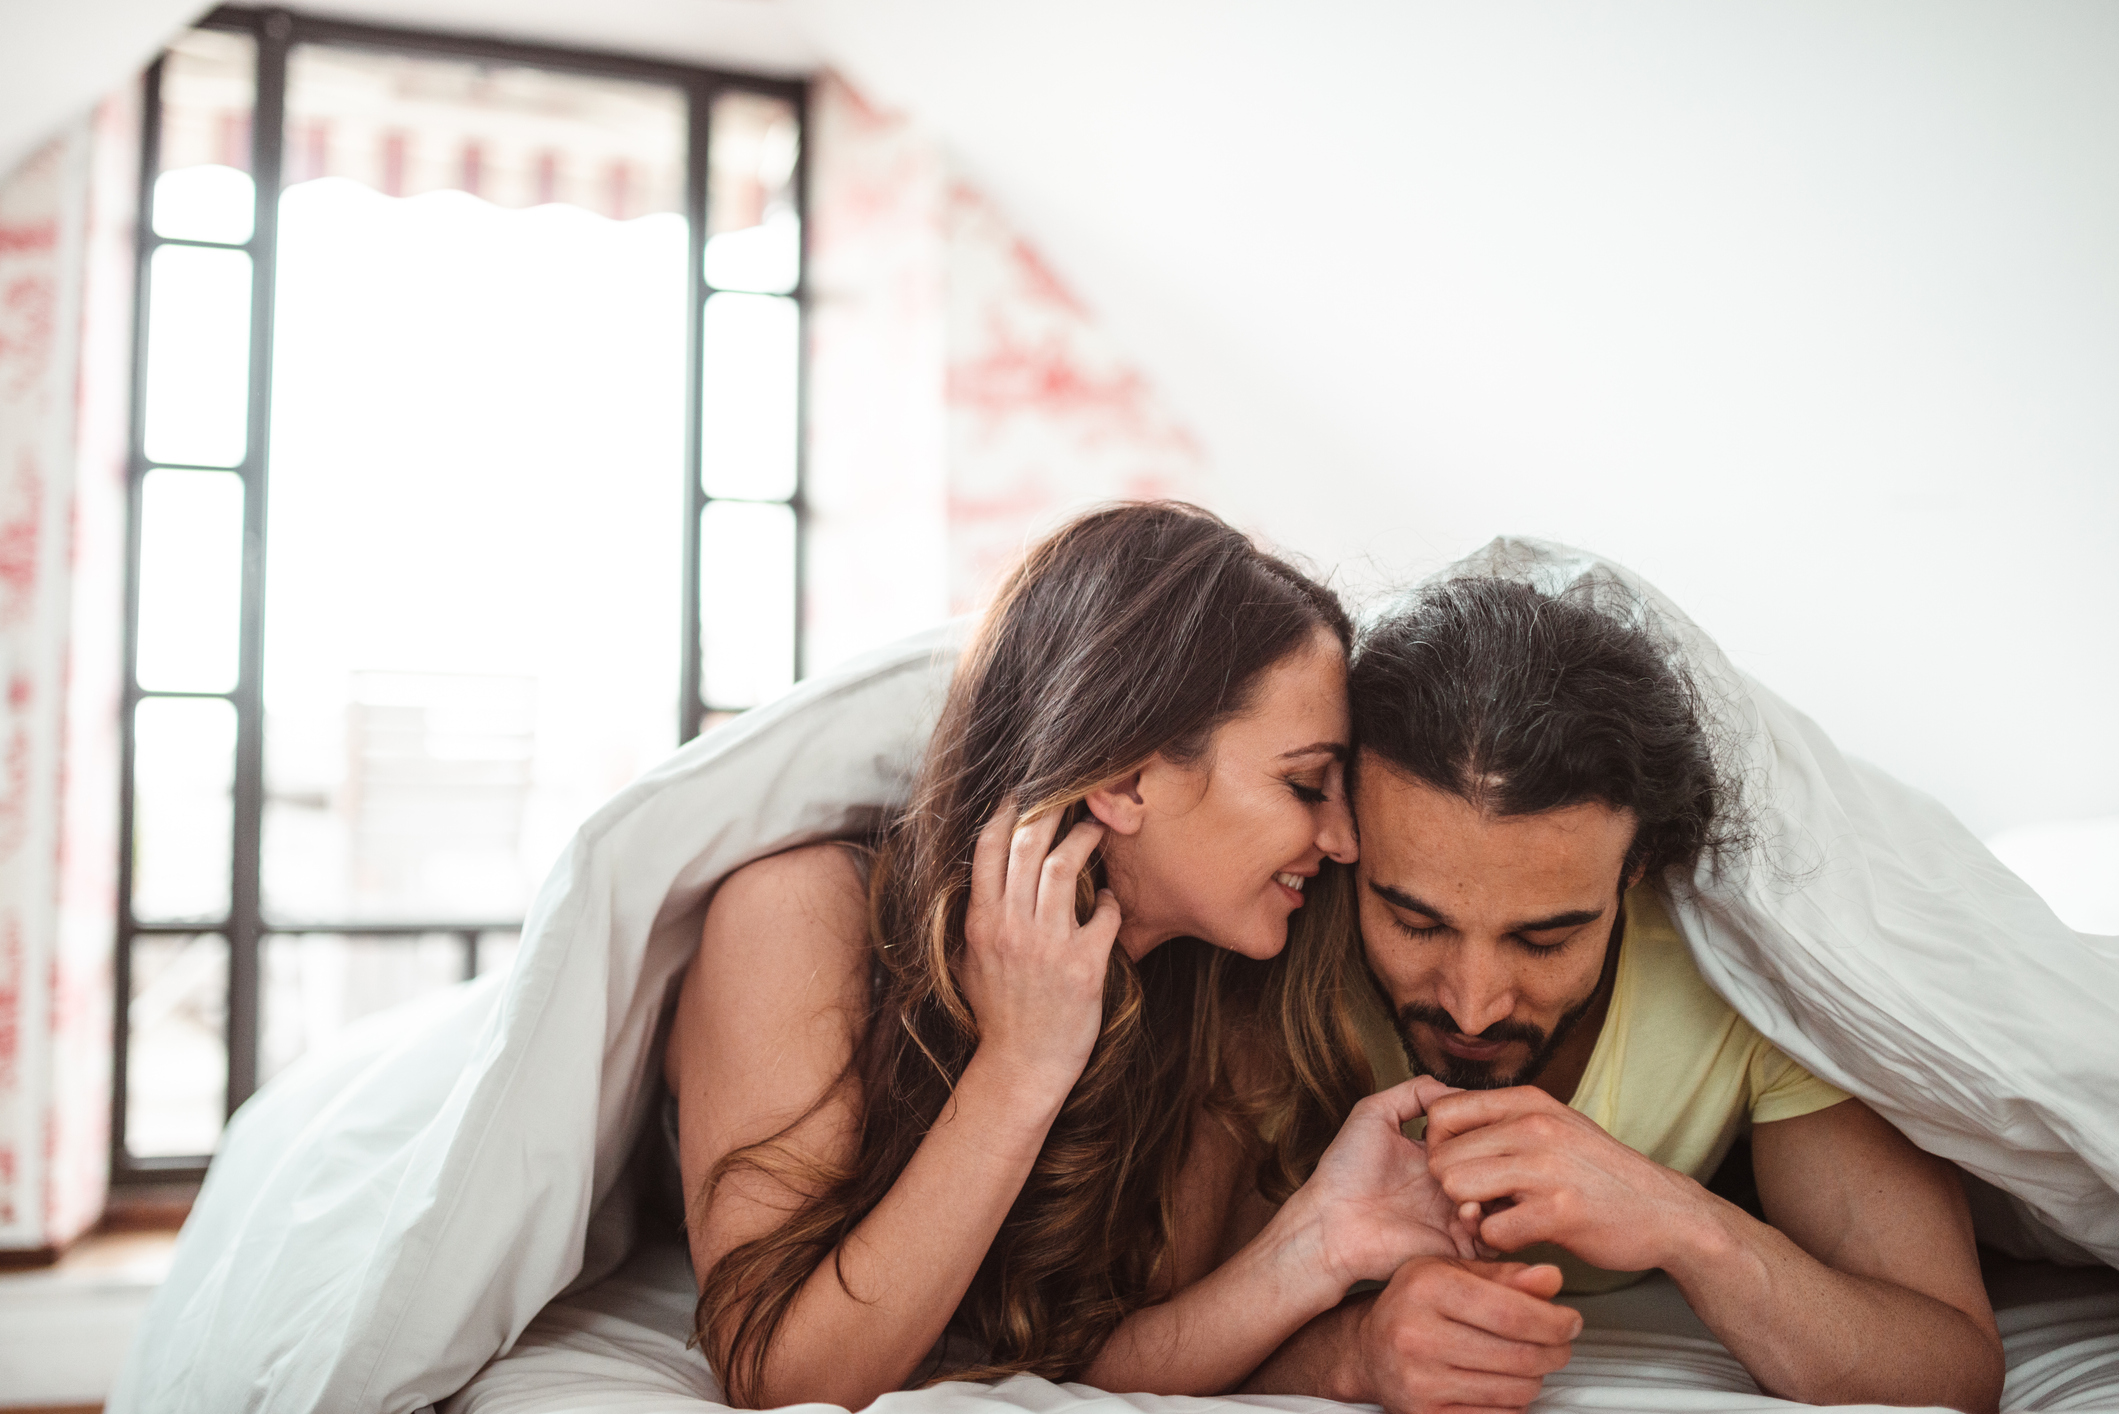 Couple in bed. A woman is more likely to feel sexual during ovulation.